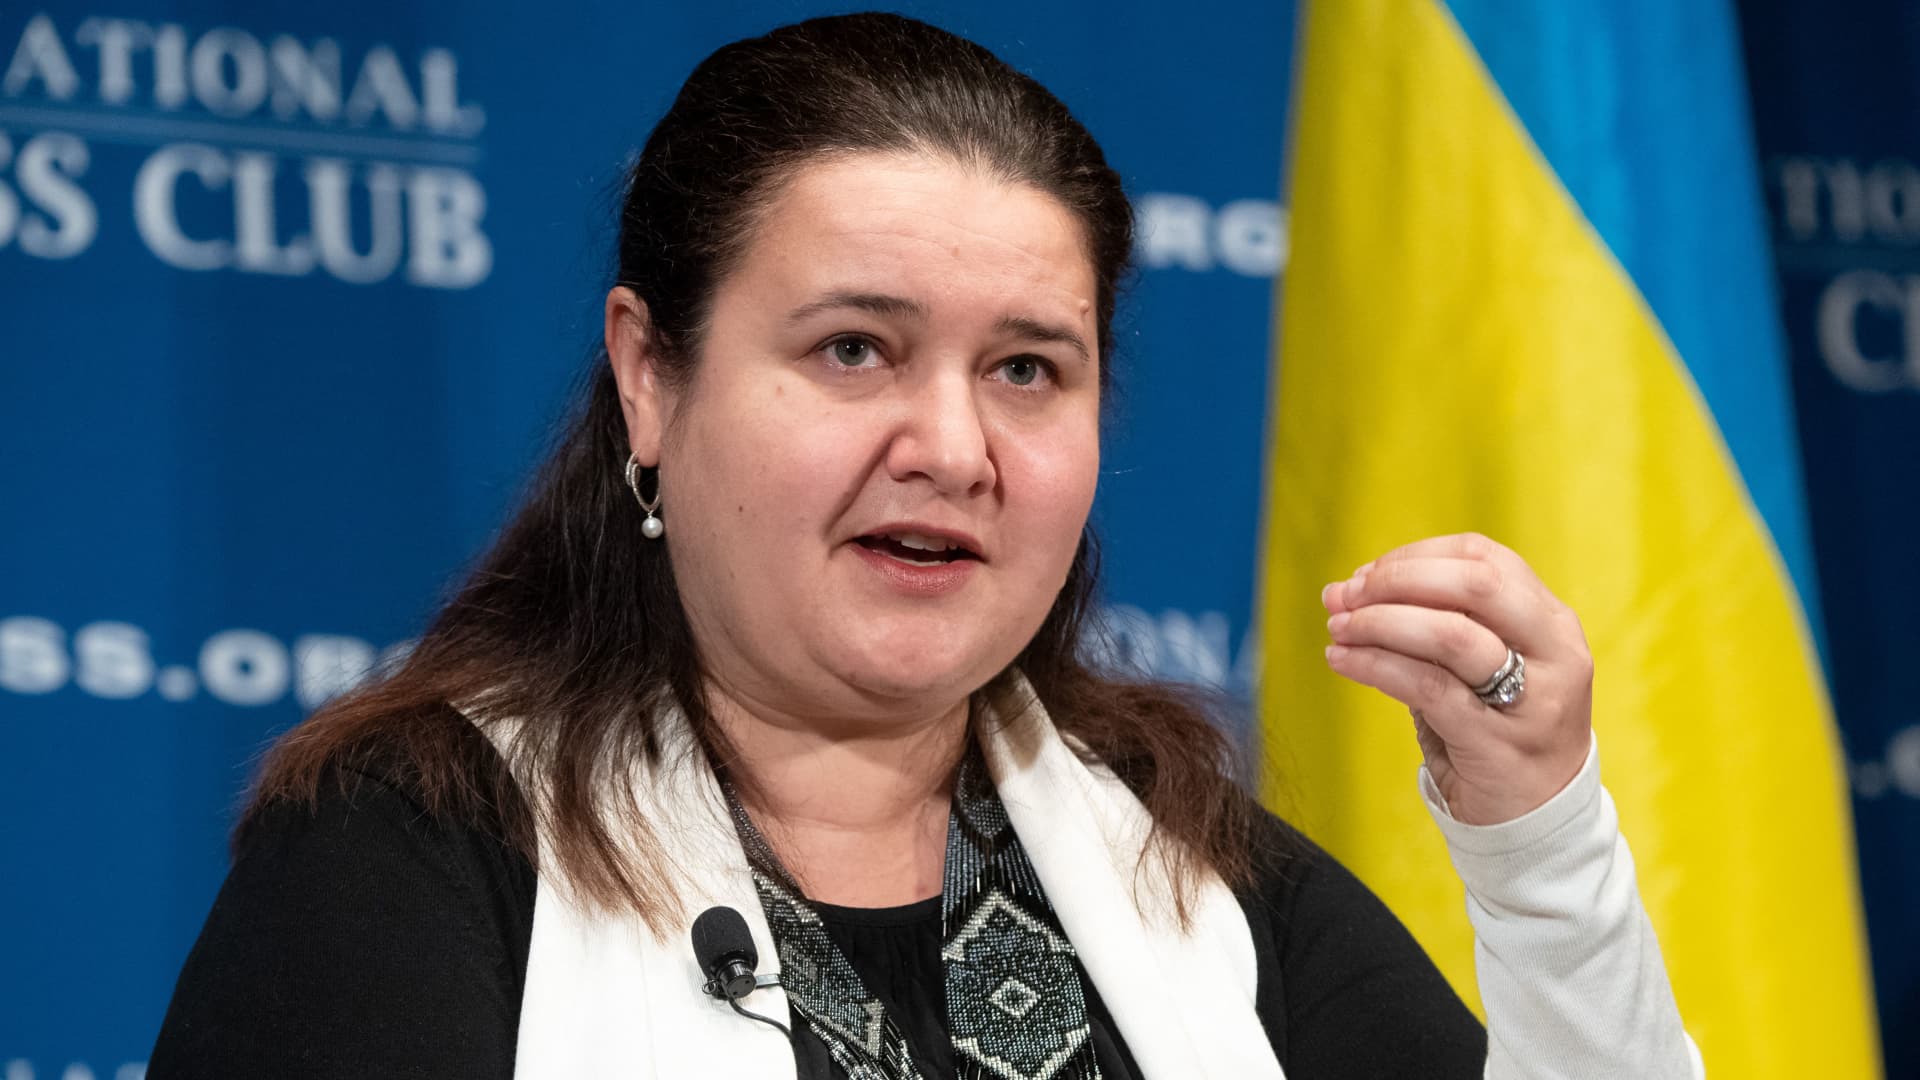 Ukrainian Ambassador to the United States Oksana Markarova speaks about the war in Ukraine during a press event at the National Press Club in Washington, DC, March 15, 2022.